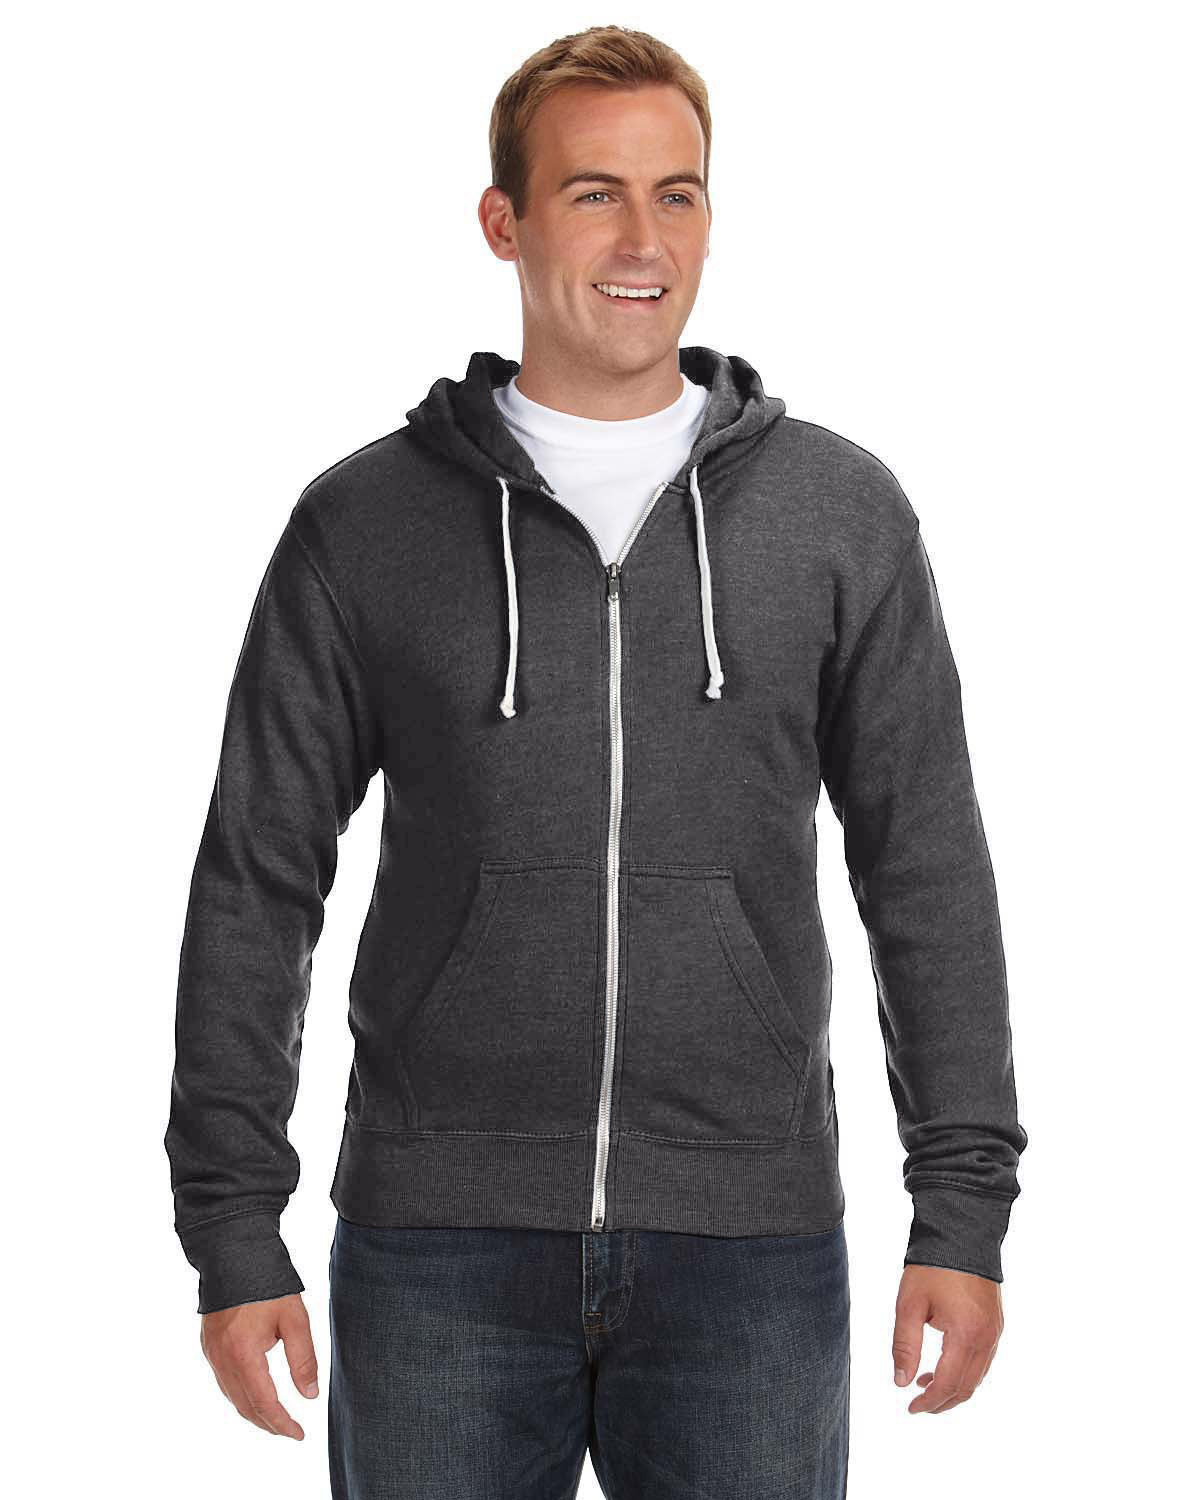 Goodwear USA French Terry Zip-Up Hoodie | American-Made Hooded Sweatshirt Triblend Charcoal / M - Made in USA